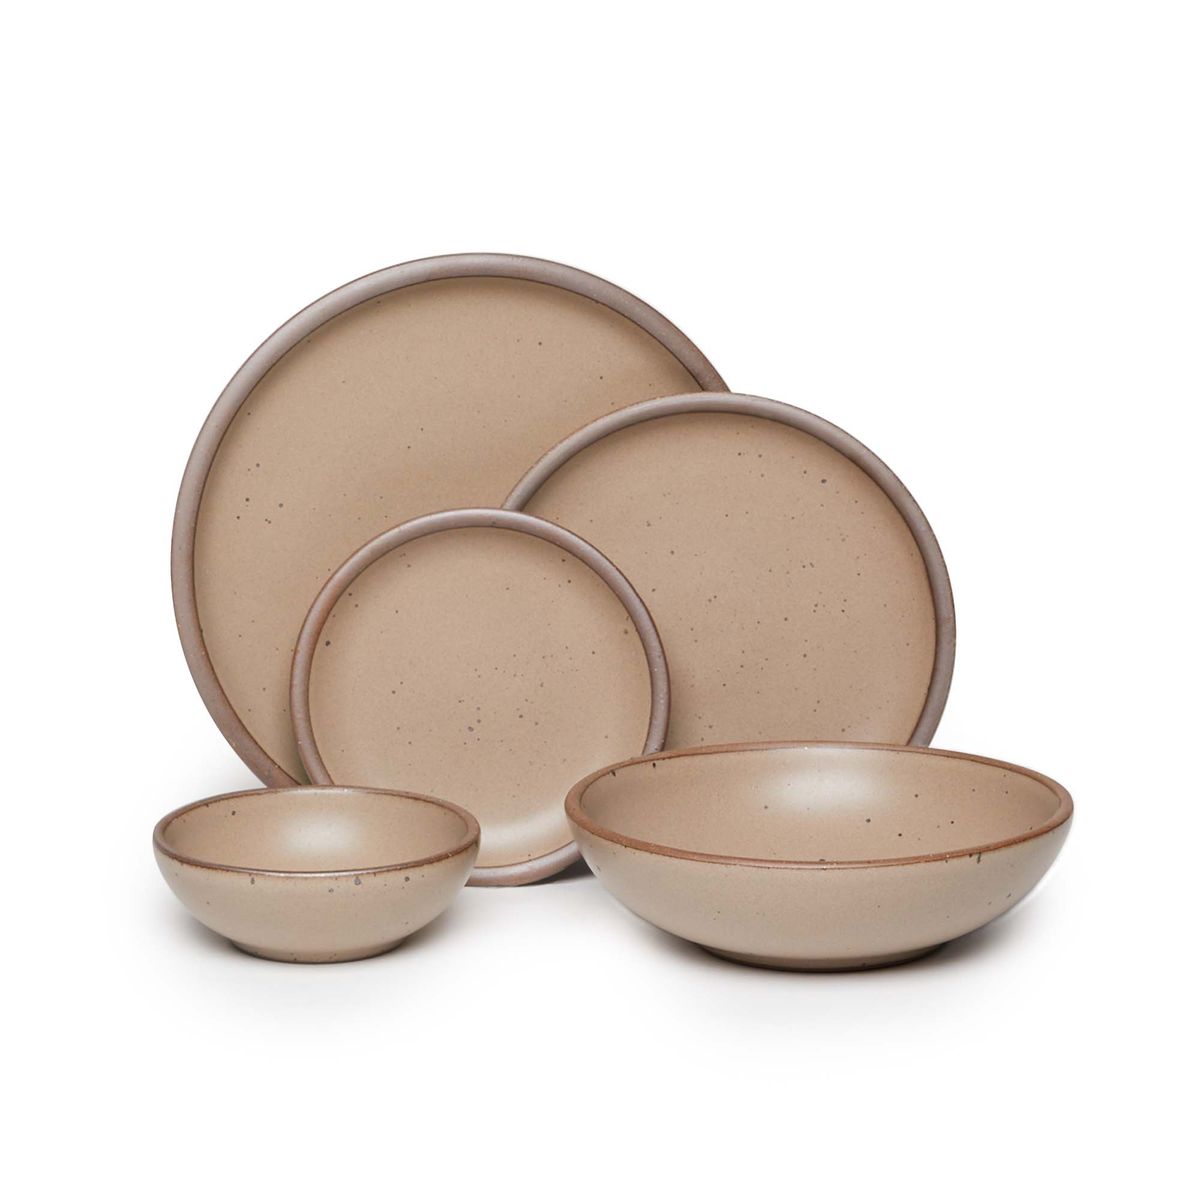 A breakfast bowl, everyday bowl, cake plate, side plate and dinner plate paired together in a warm pale brown featuring iron speckles